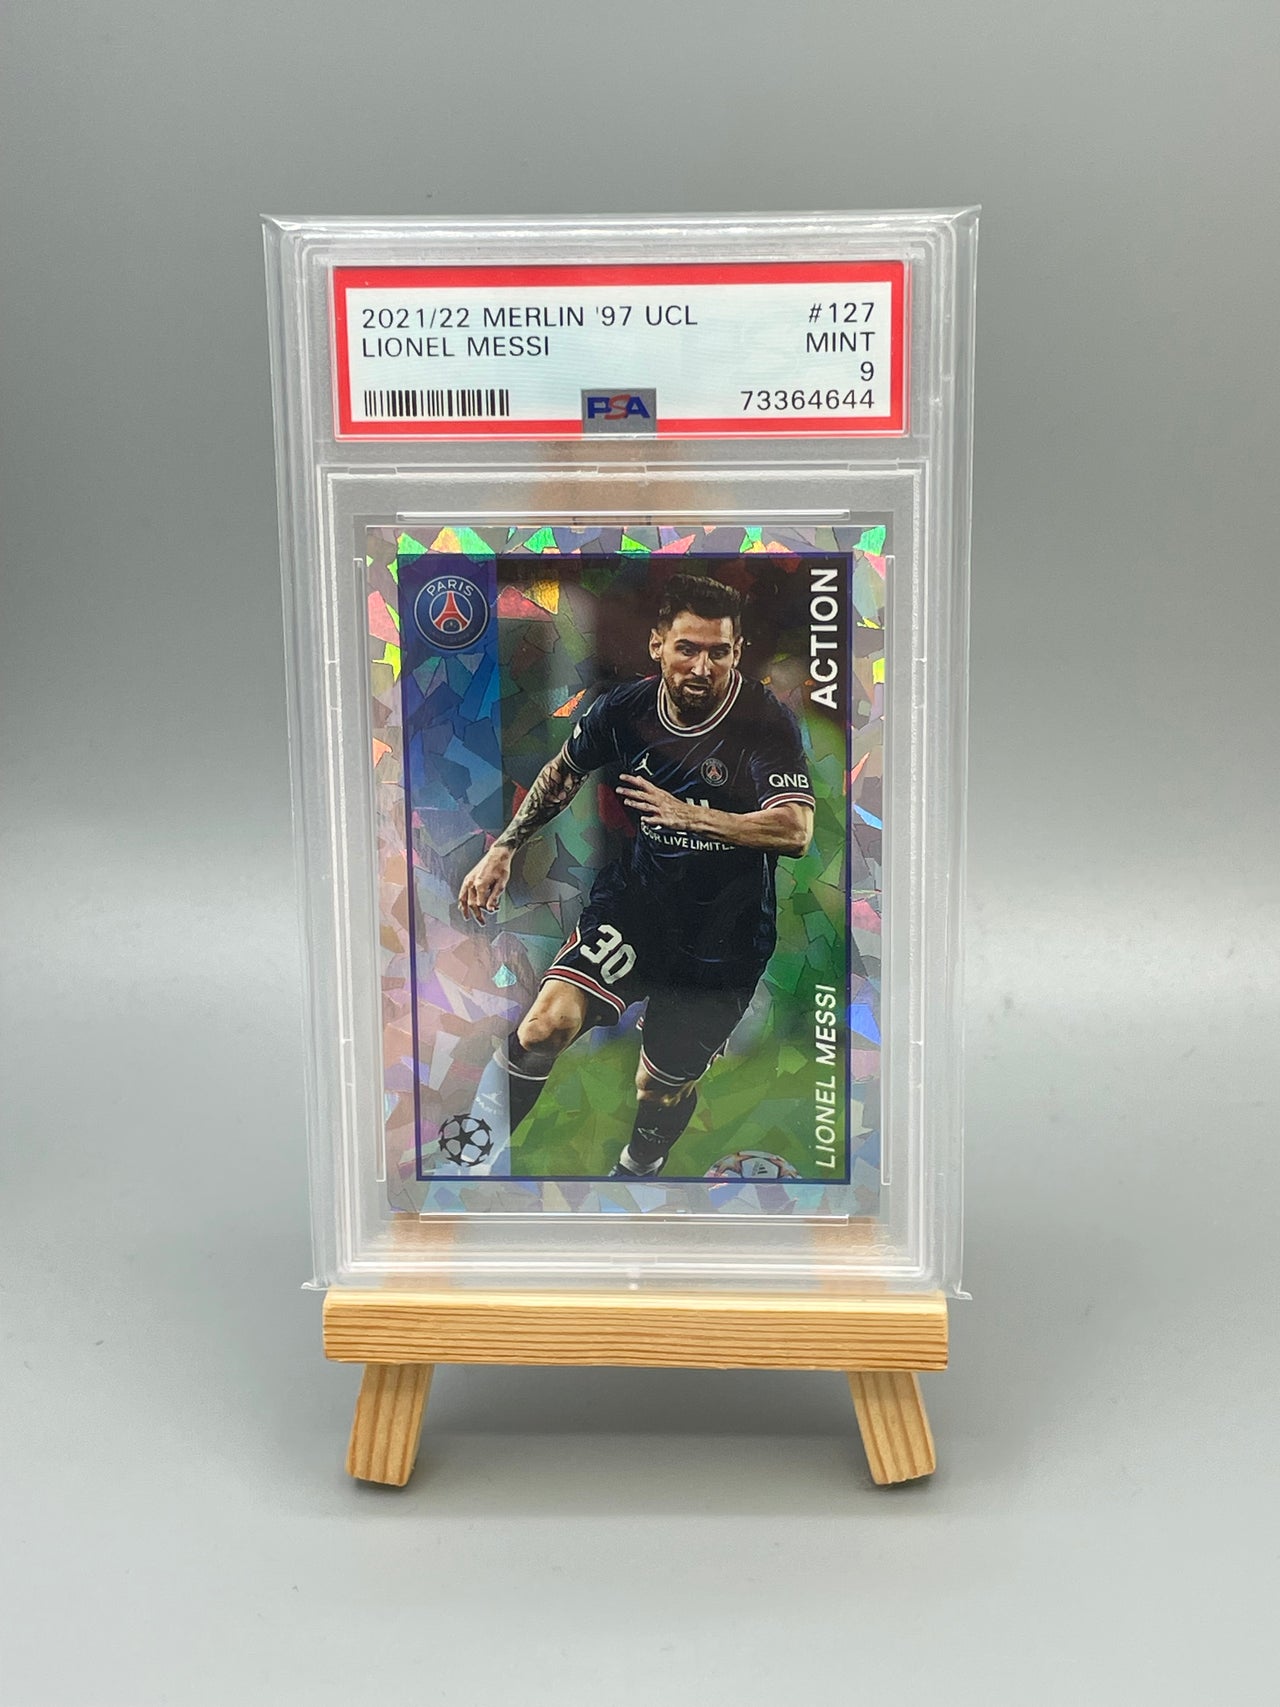 Fussball -  Topps 2021 / 22 - Merlin '97 UCL - Messi Cracked Ice PSA 9